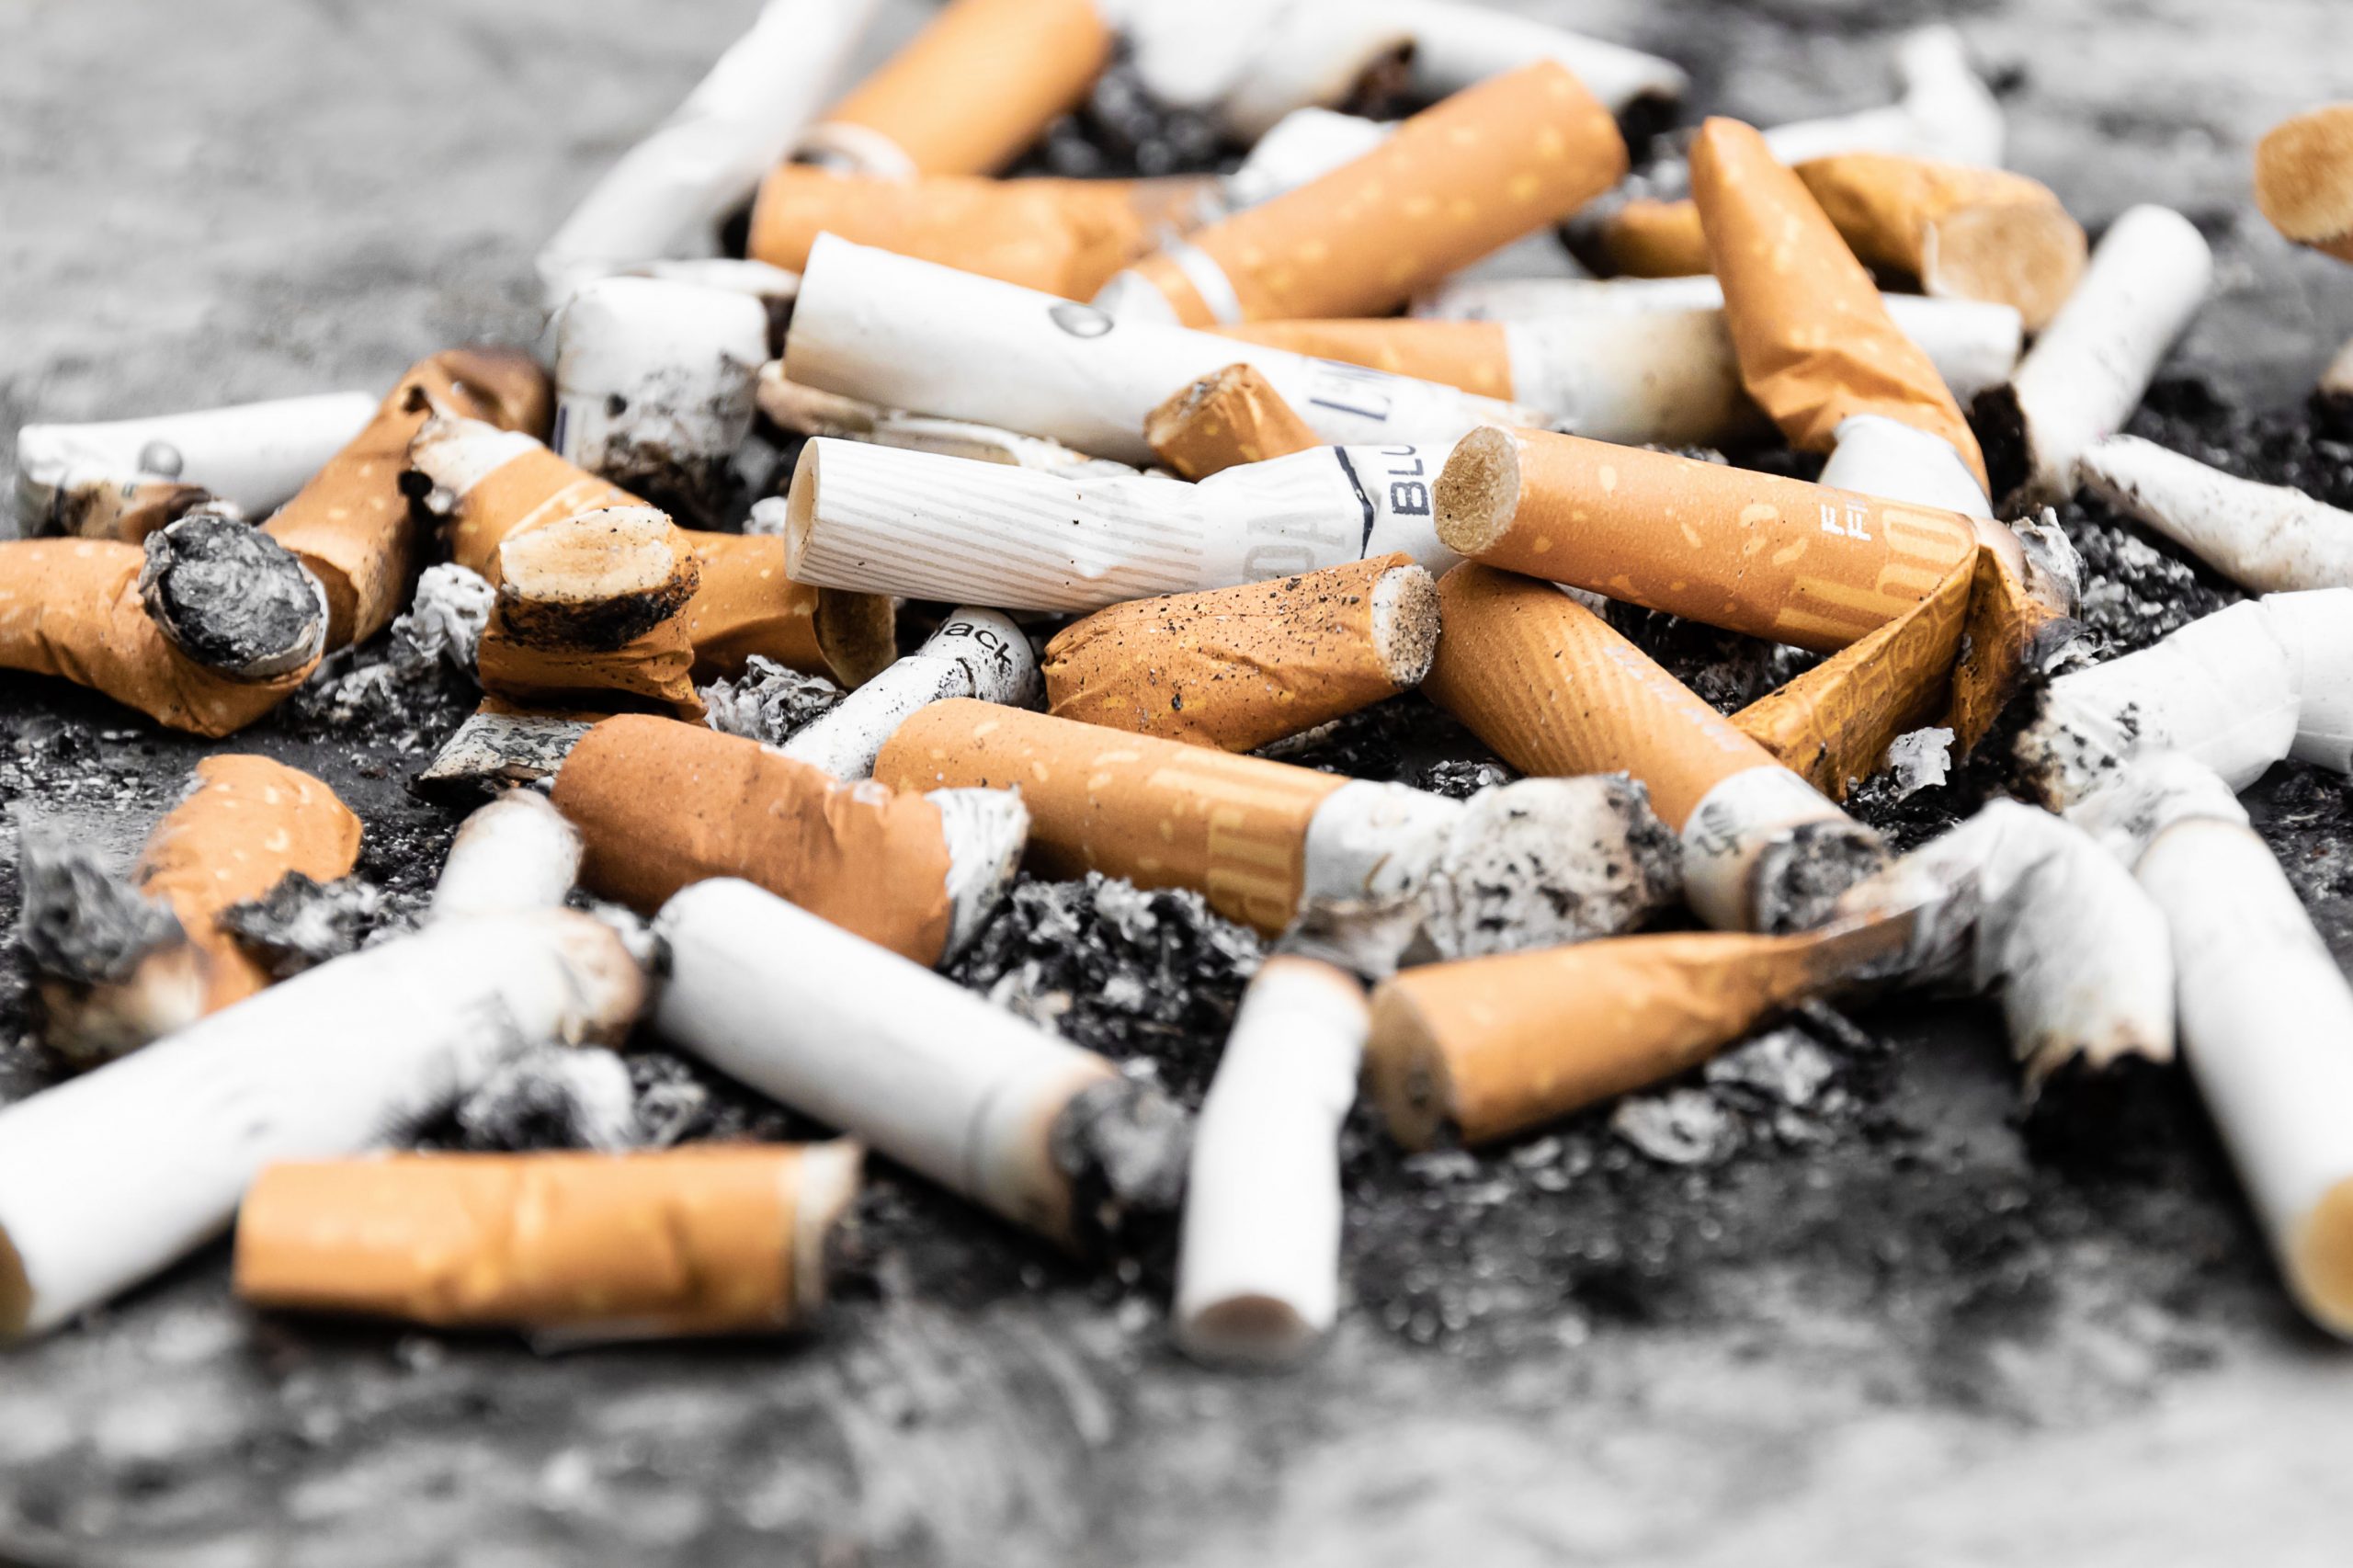 A pile of cigarette butts.